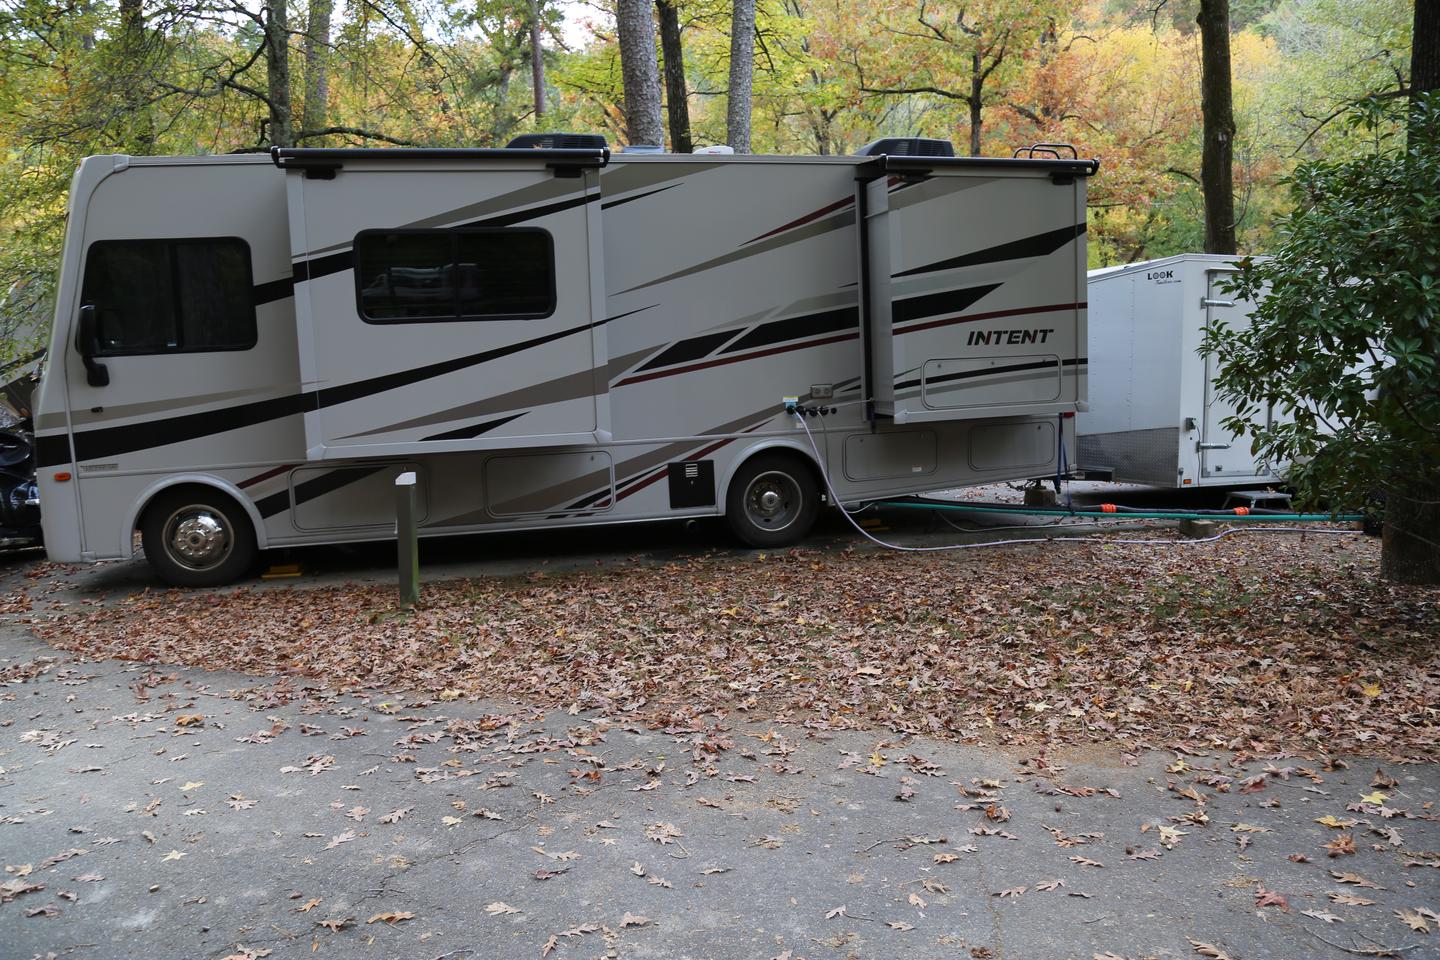 Large RV with pop out sides in campsite with fallen leaves surroundingCampsite 8